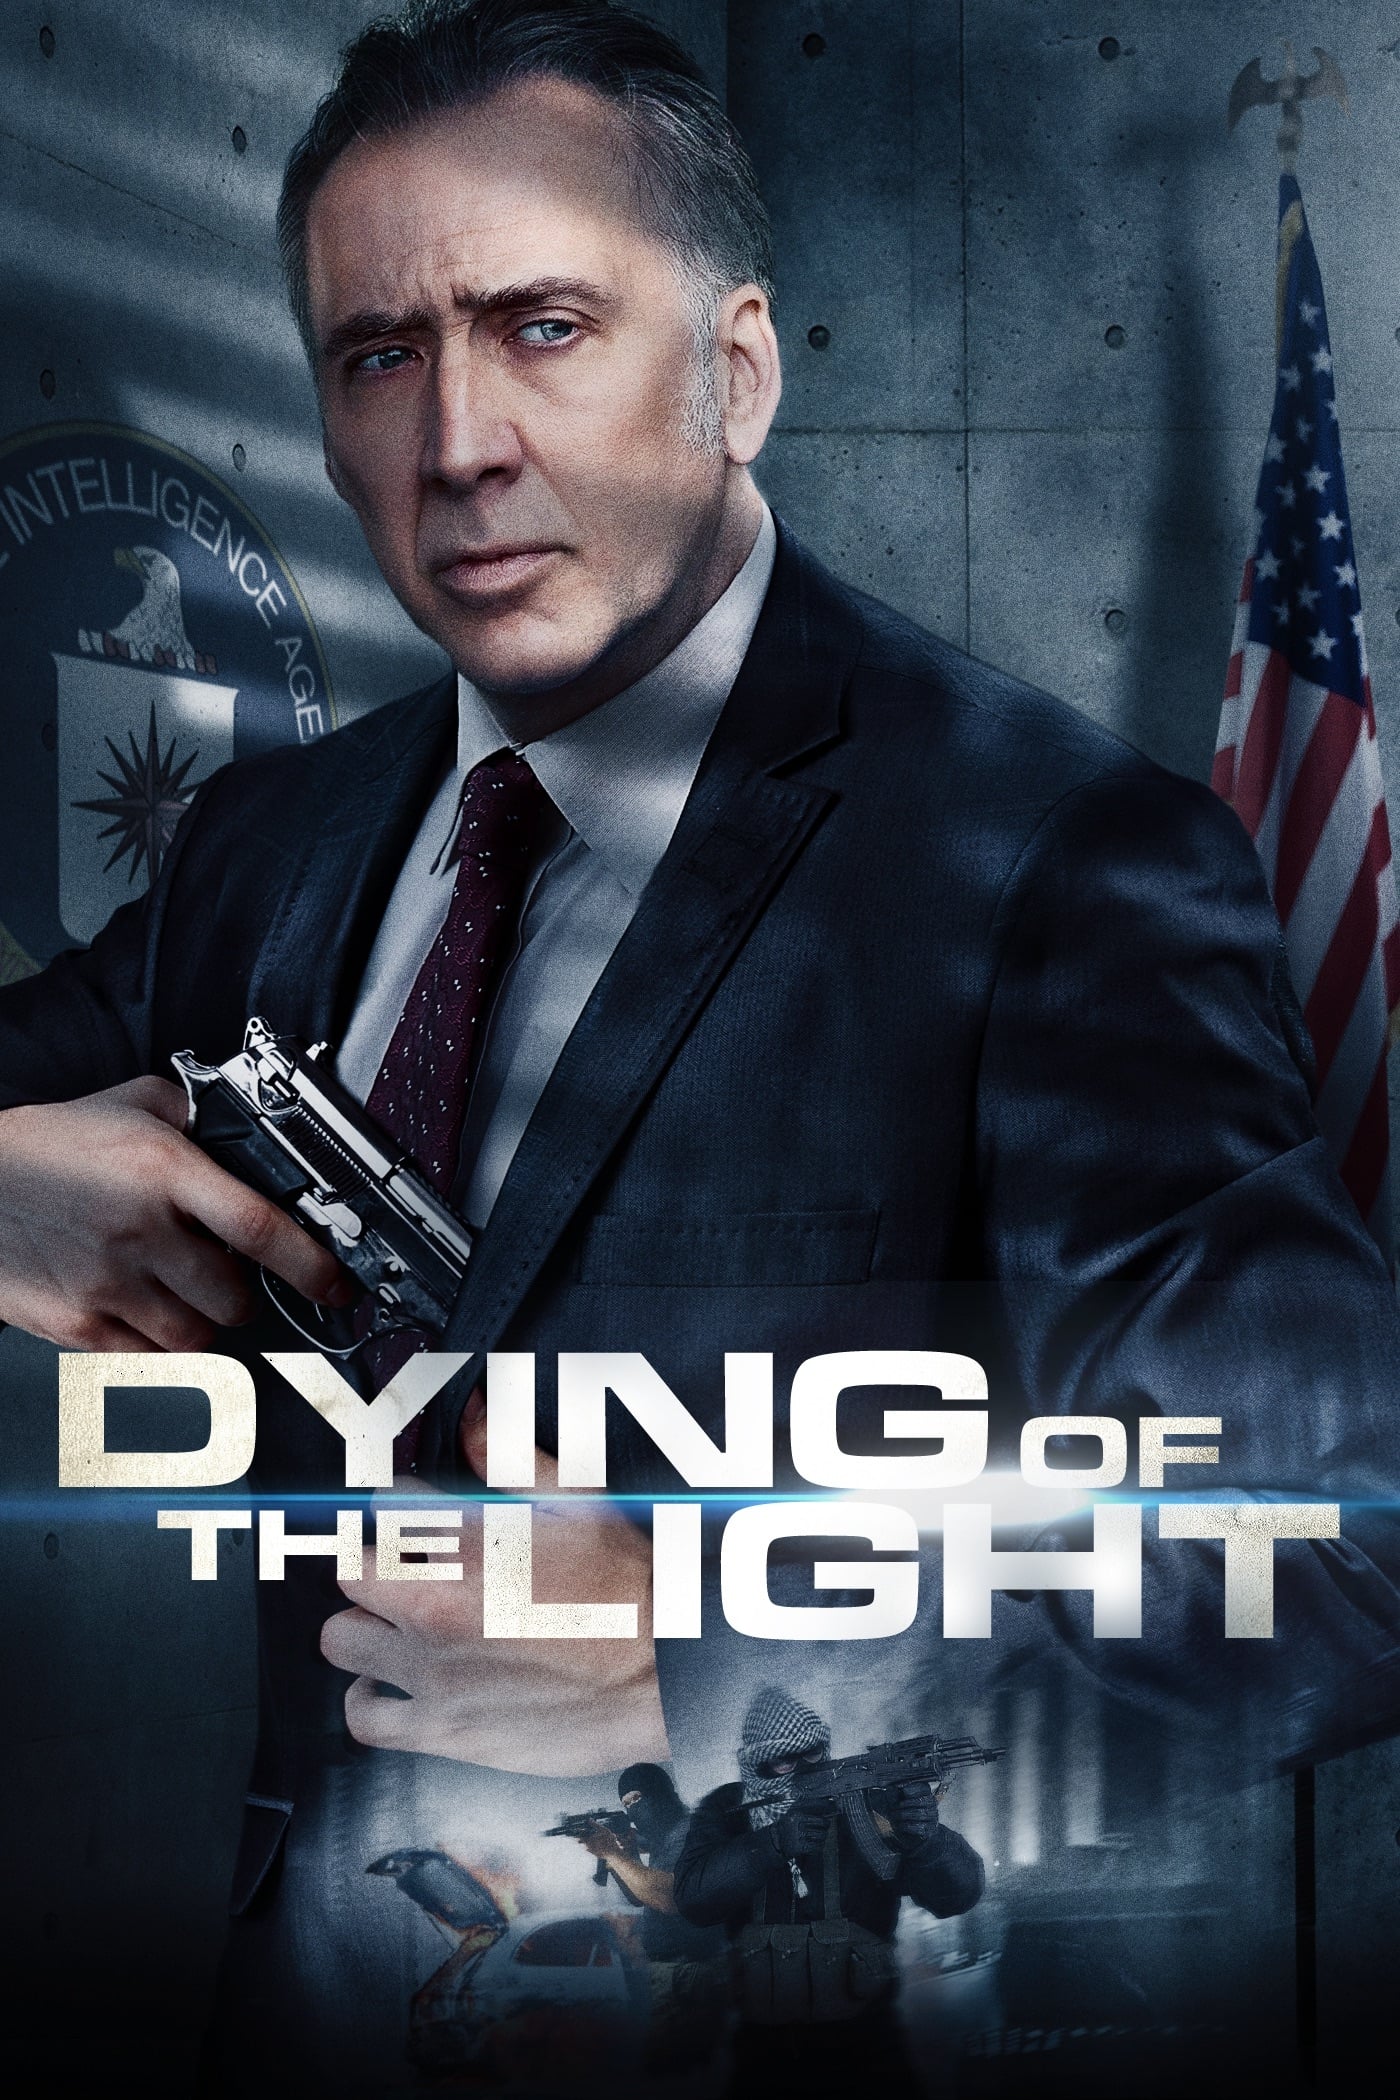 Dying of the Light (2014)